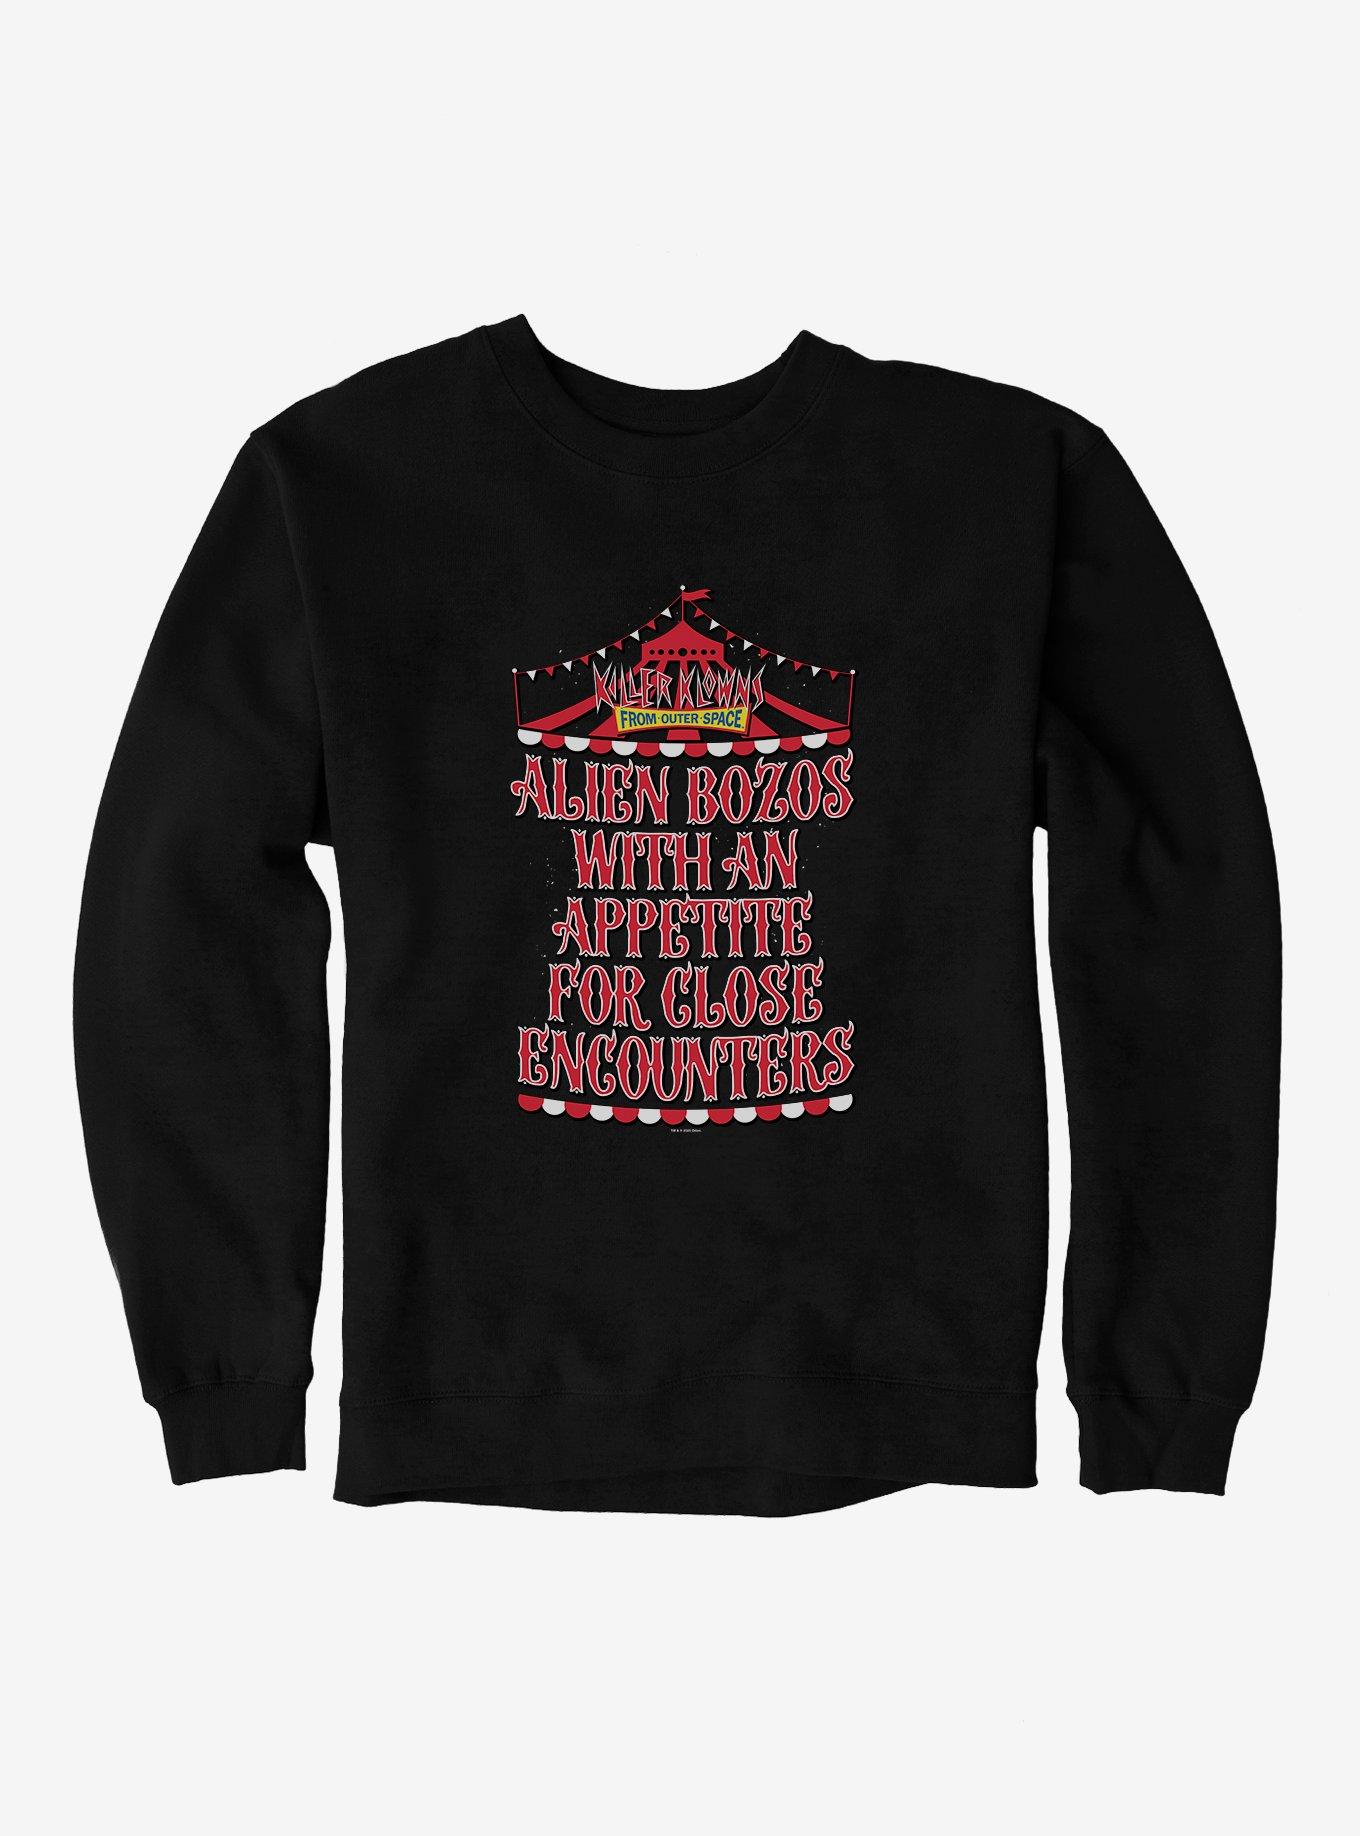 Killer Klowns From Outer Space Alien Bozos With An Apetite For Close Encounters Sweatshirt, BLACK, hi-res